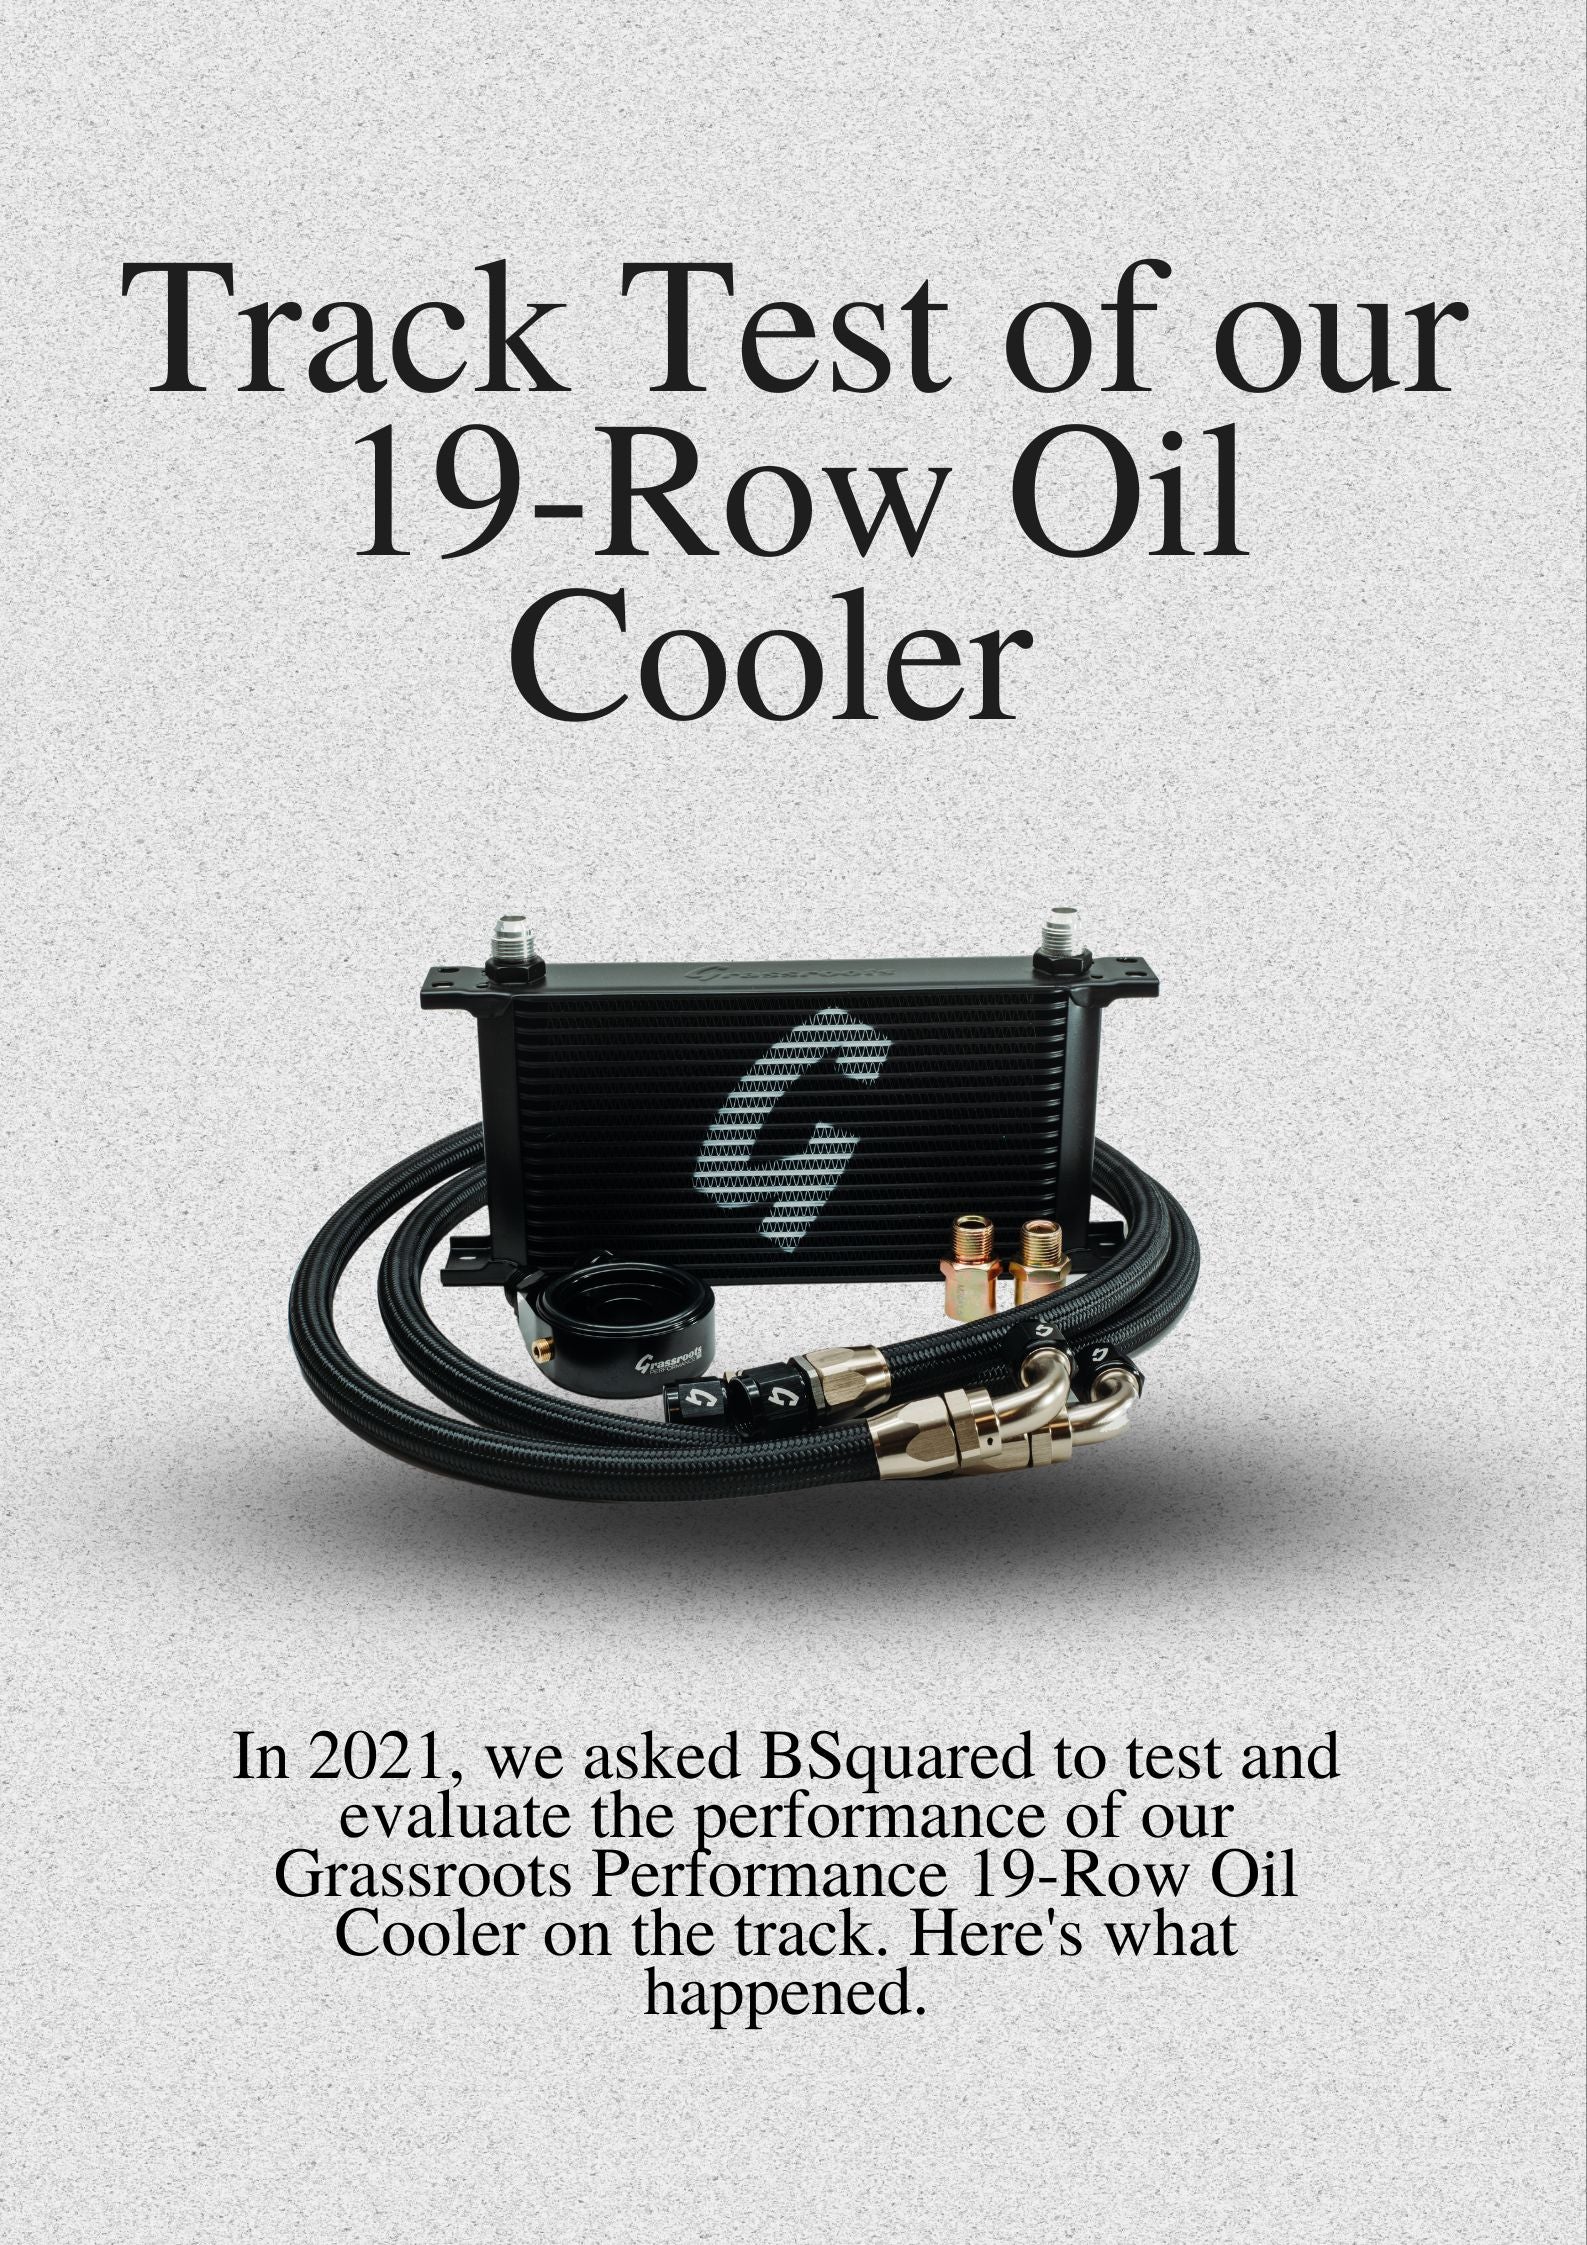 Track Test of our Grassroots Performance 19-Row Oil Cooler [PROVEN]